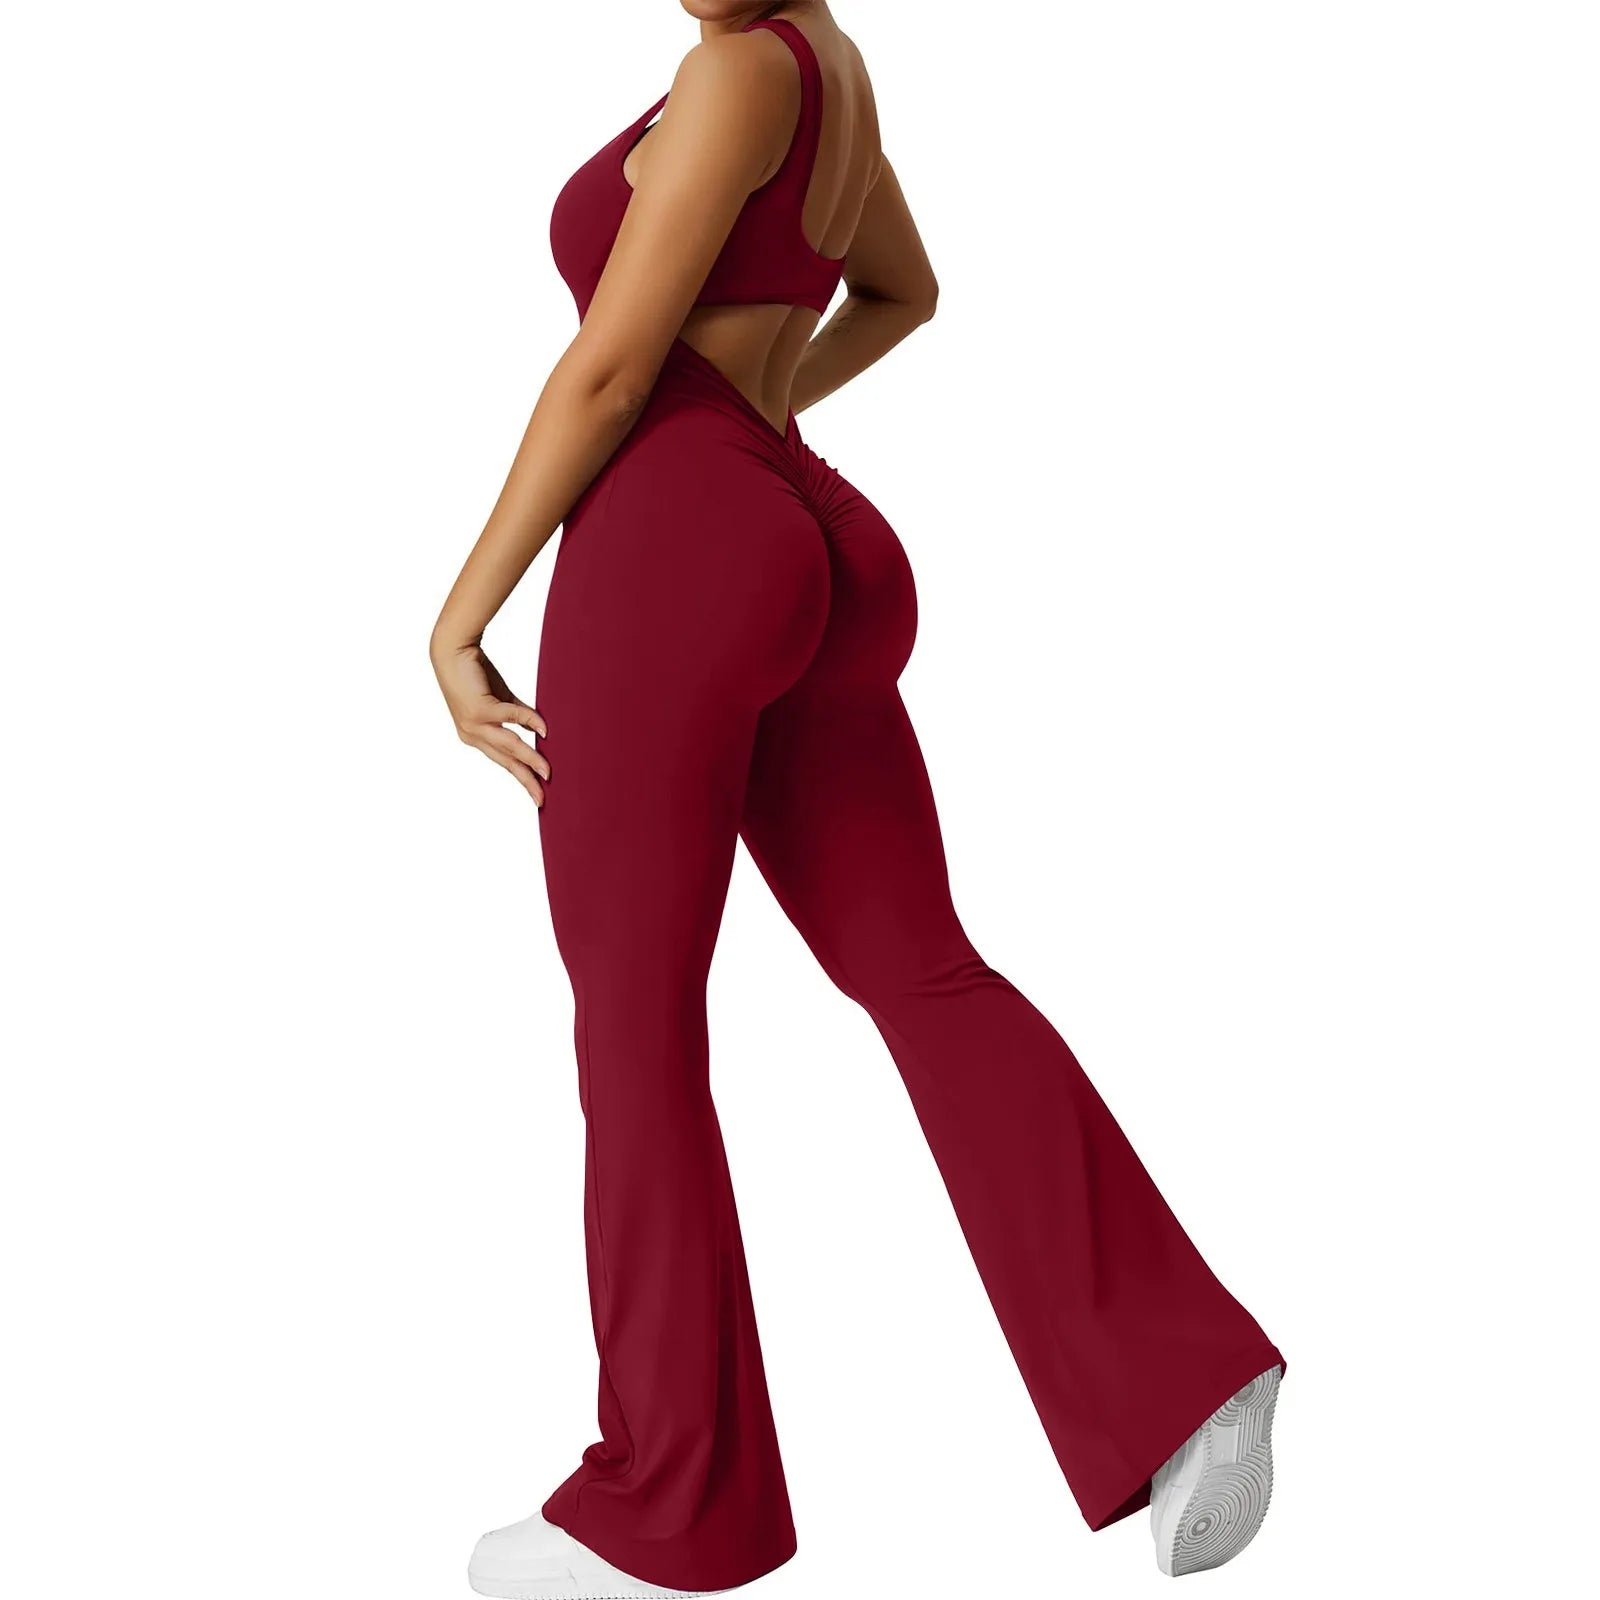 Backless Sexy Women's Jumpsuit with Elastic Waist - Stylish Sleeveless Bodysuit for Fashionable Ladies  OurLum.com   